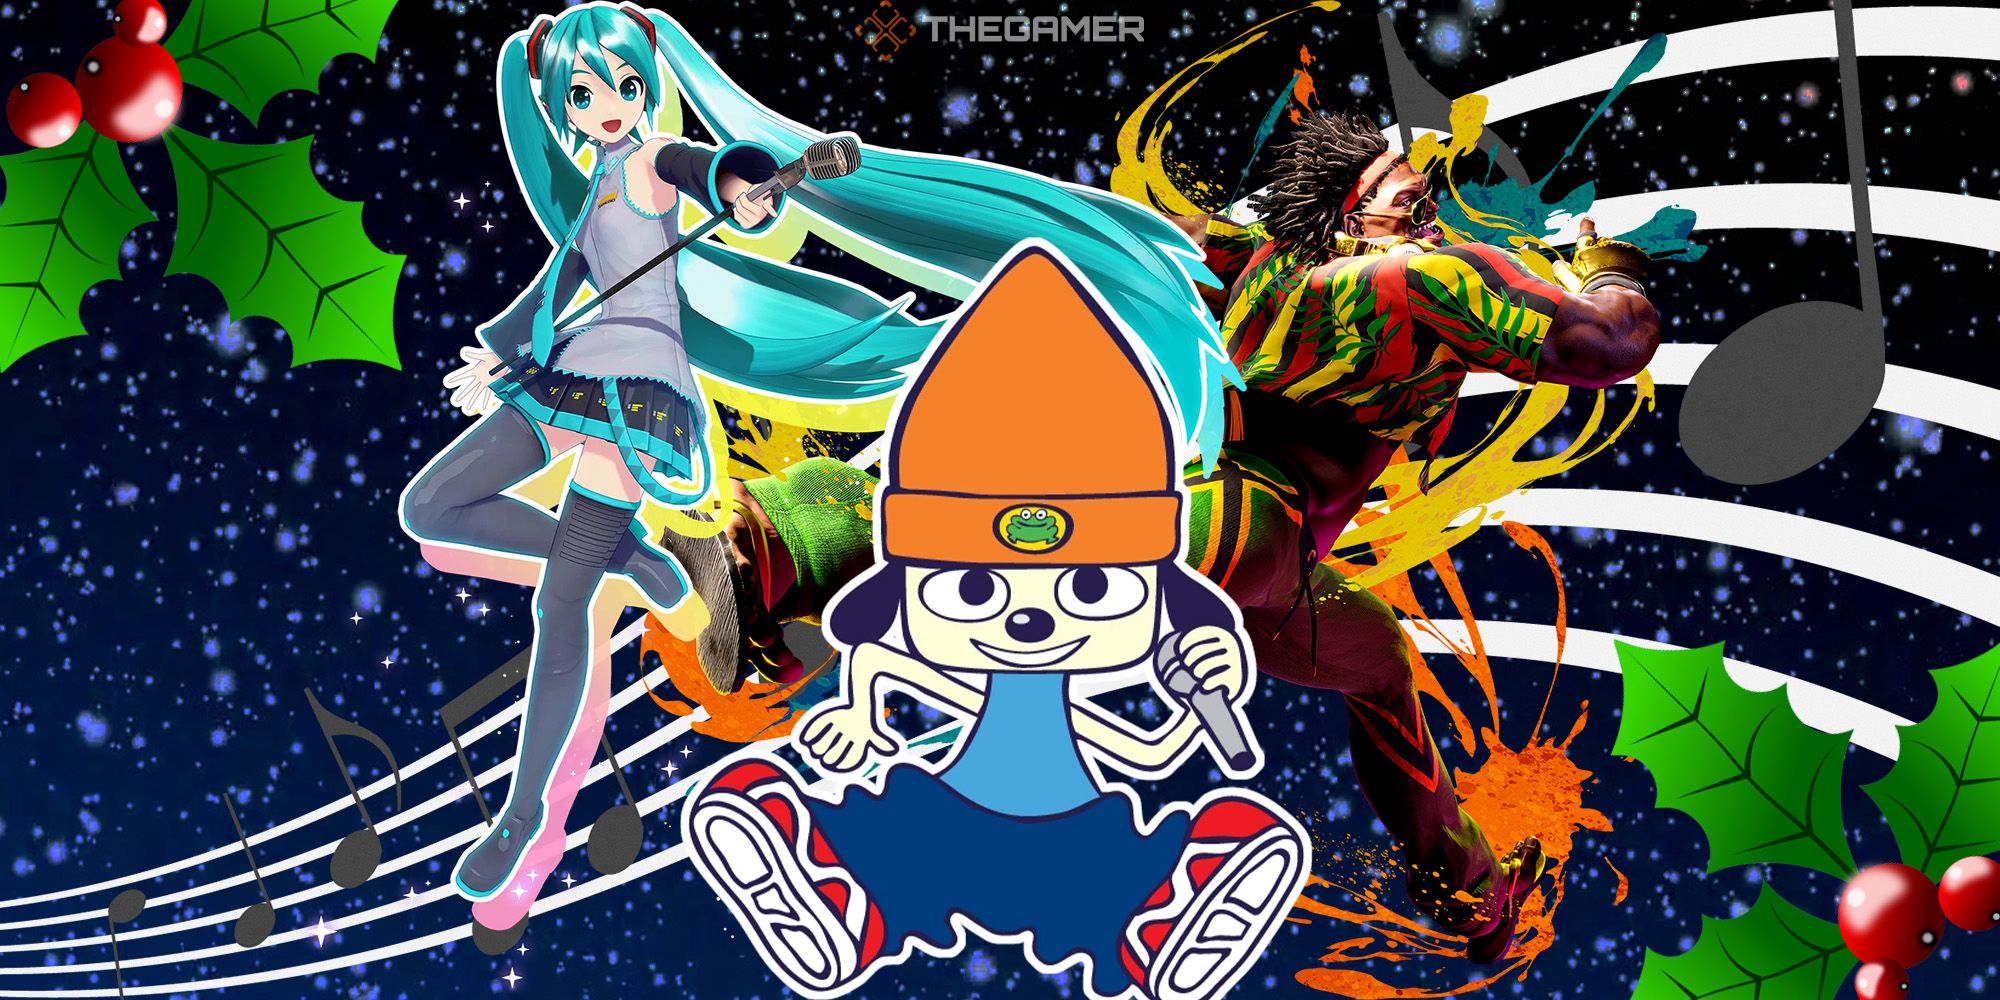 Hatsune Miku, PaRappa, and DeeJay stand amongst a snowy winter sky adorned with music notes. The image is bordered by two holly plants. Custom image for TG.